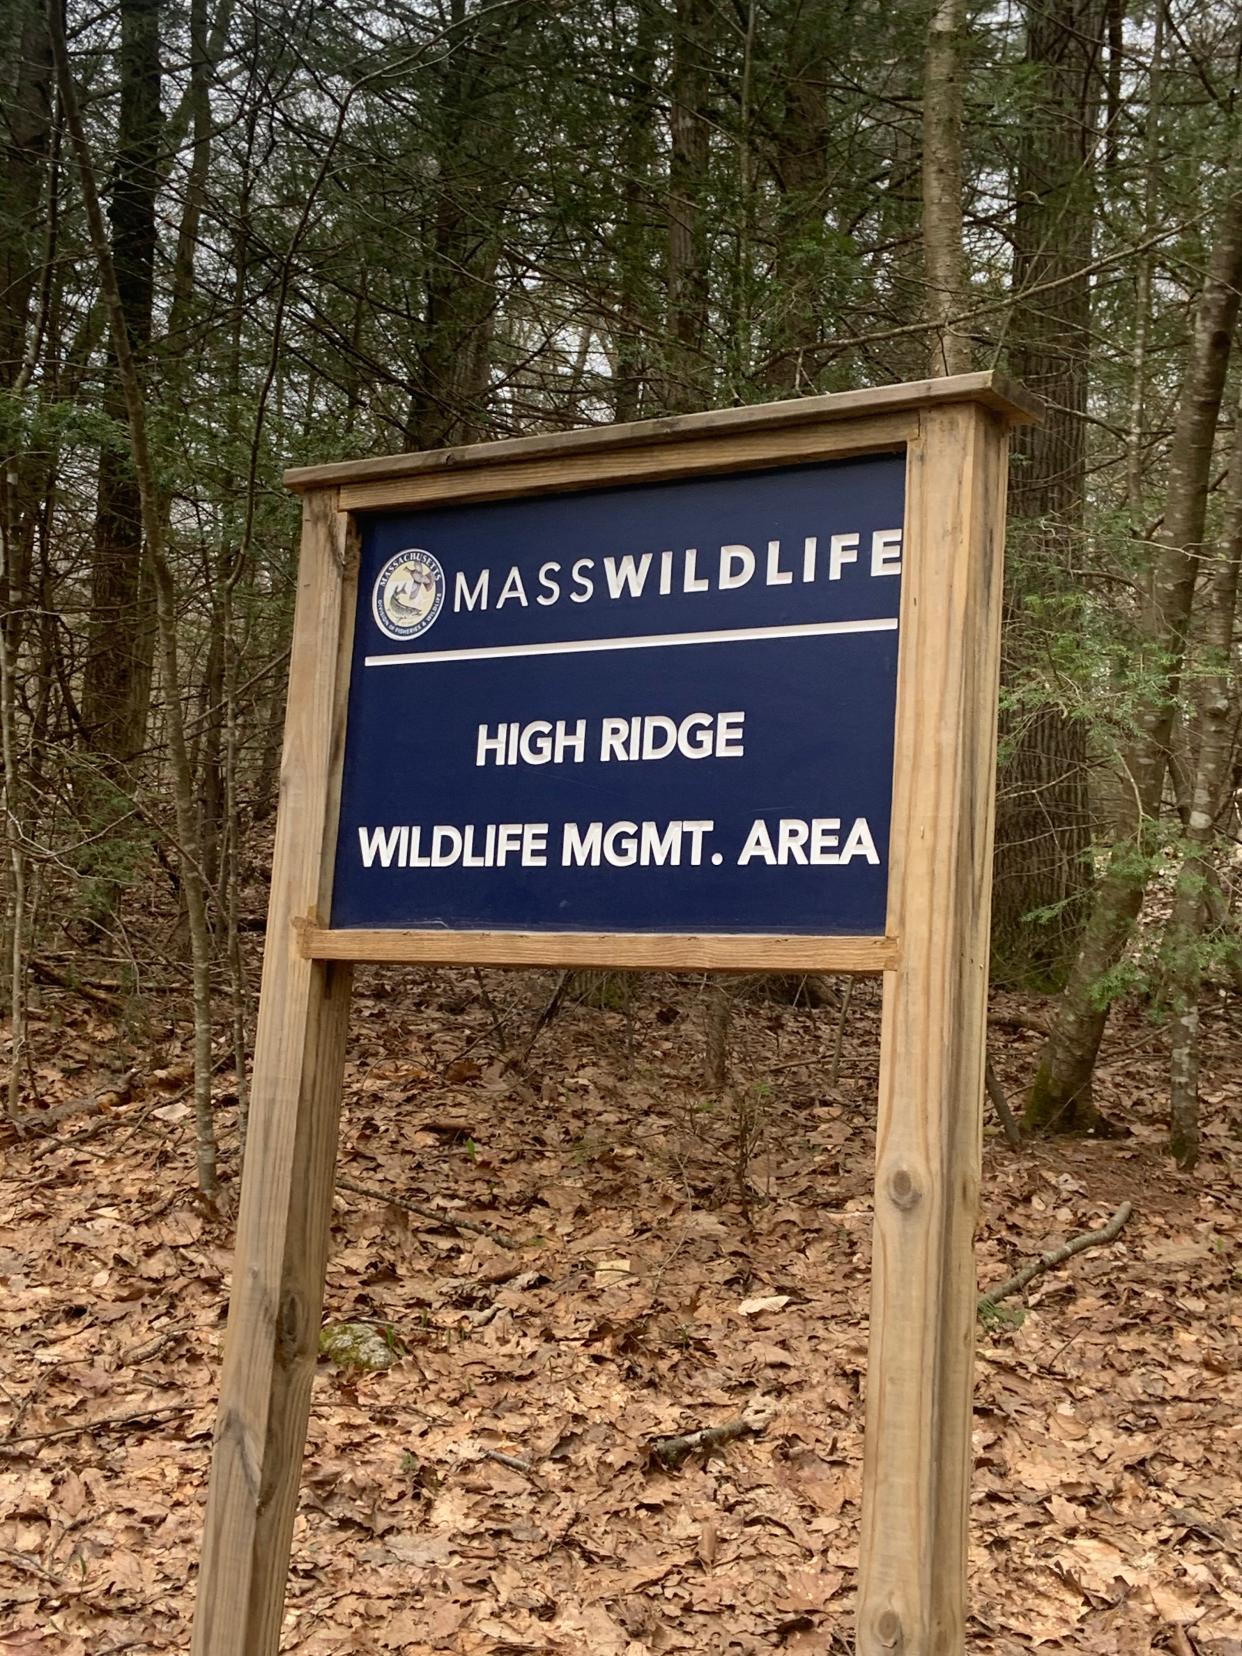 The several maintenance roads winding through the High Ridge Wildlife Management Area in Westminster make for easy and enjoyable strolls for dog-walkers.